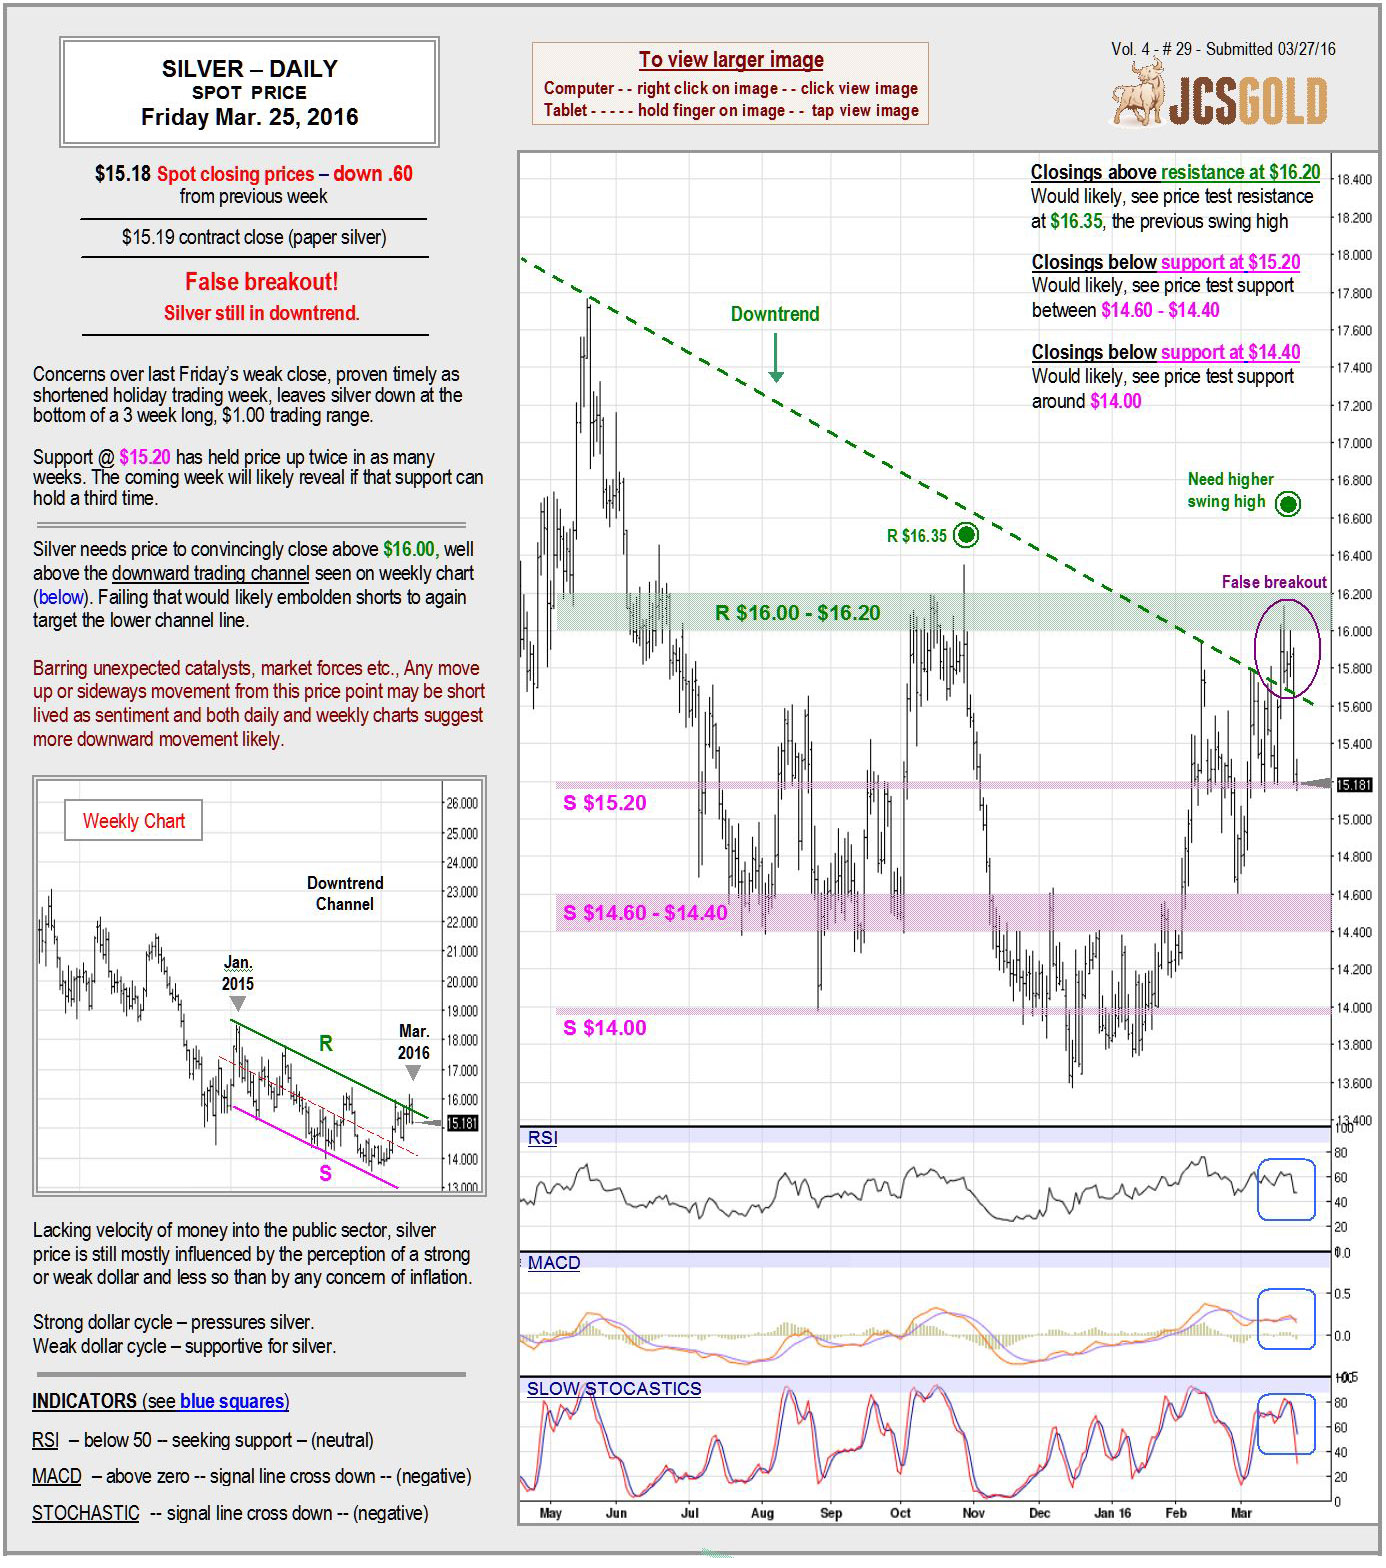 Mar 25, 2016 chart & commentary